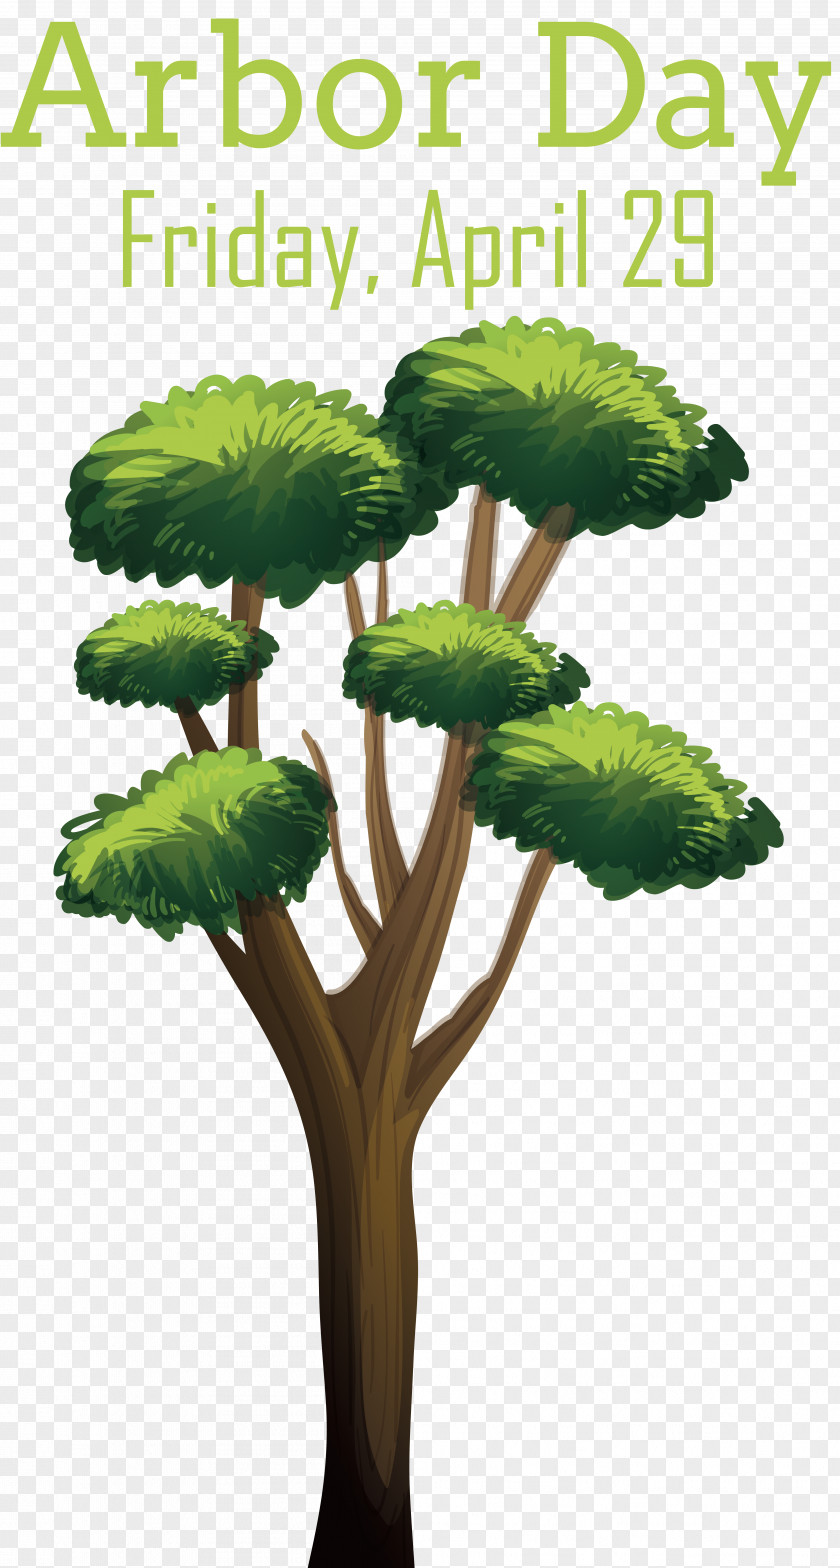 Royalty-free Tree Pixers Branch Vector PNG